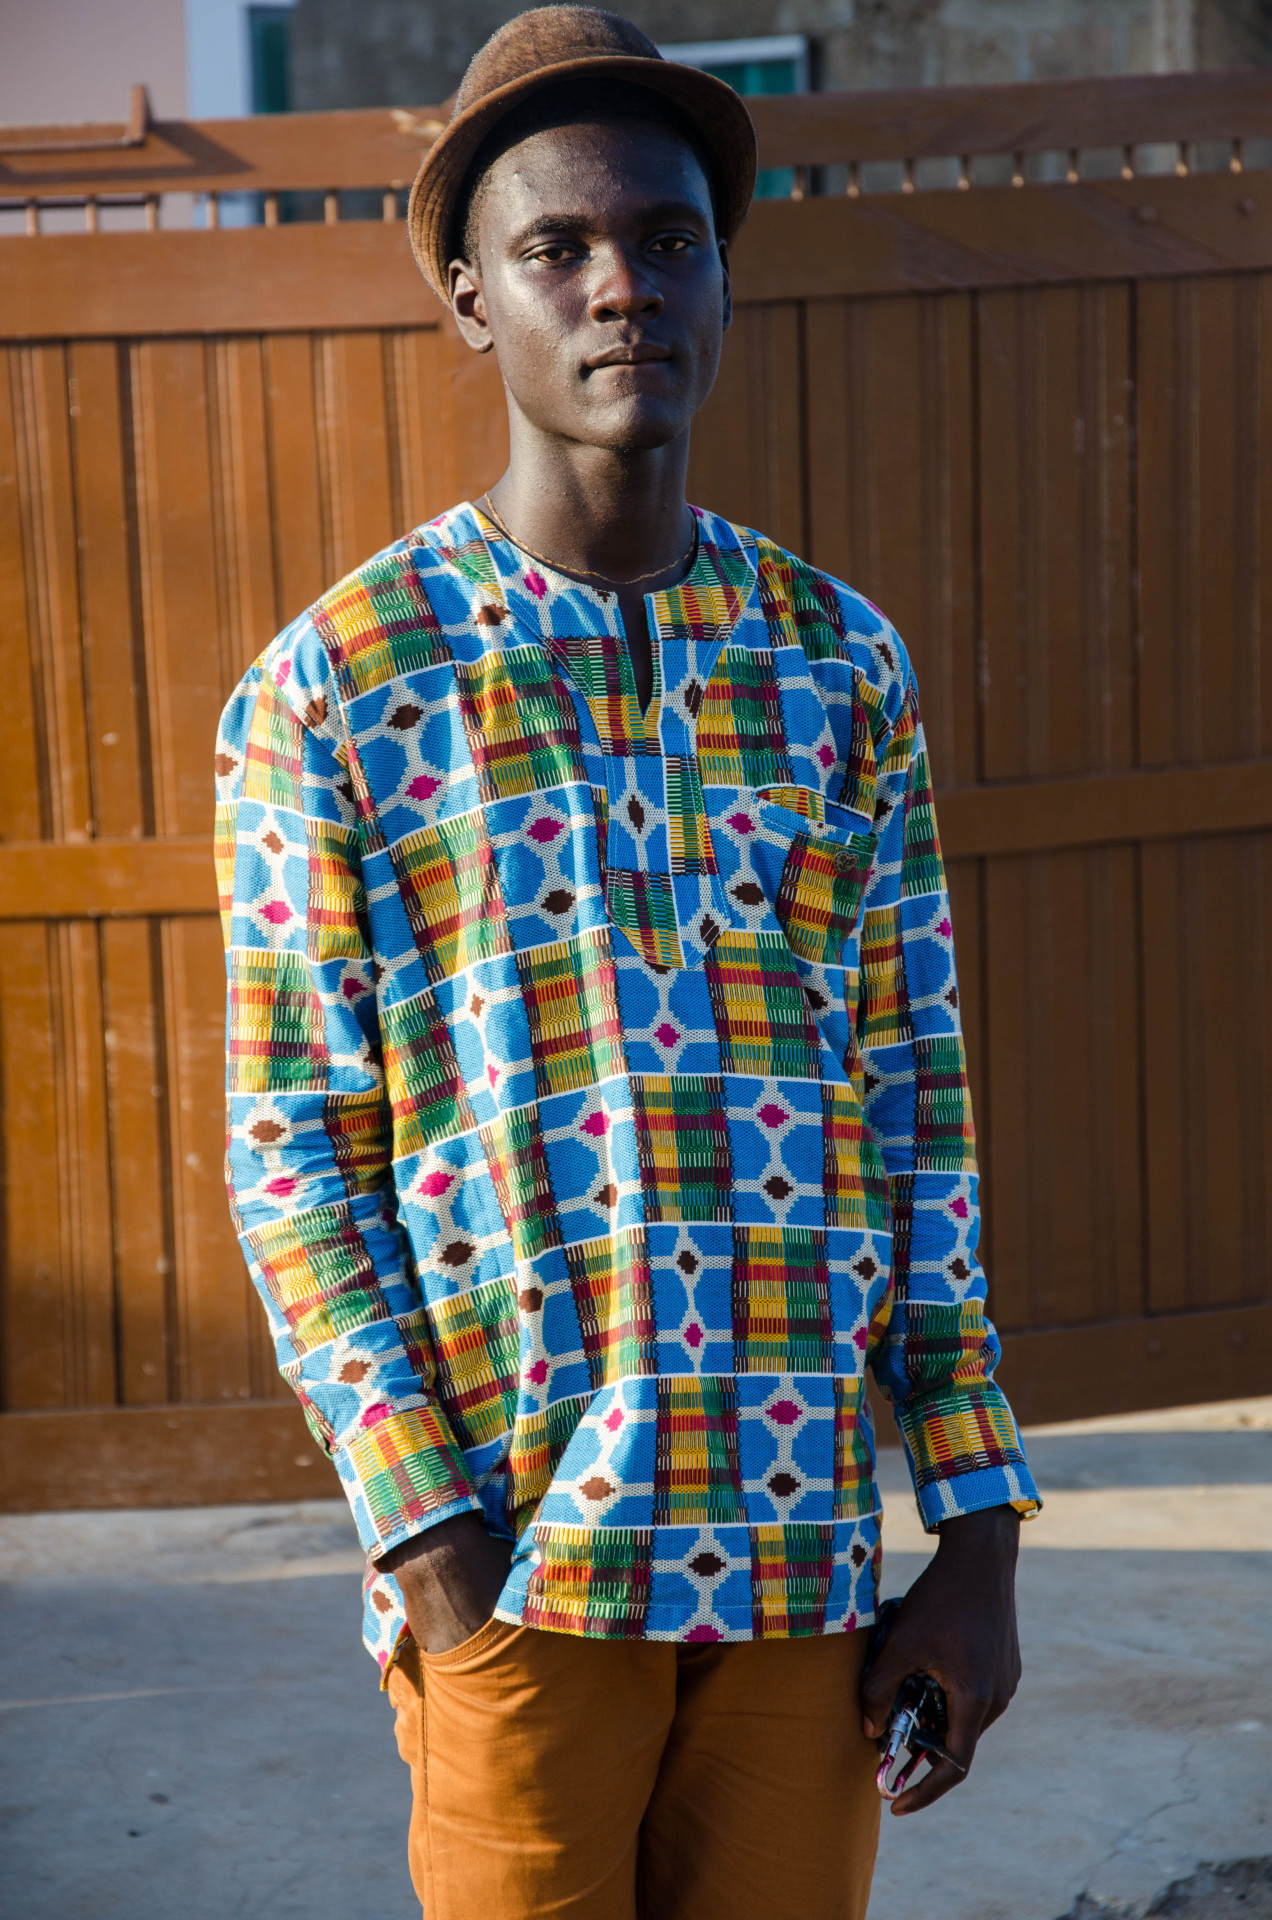 AFROKLECTIC - humansofaccra: What’s your personal struggle...